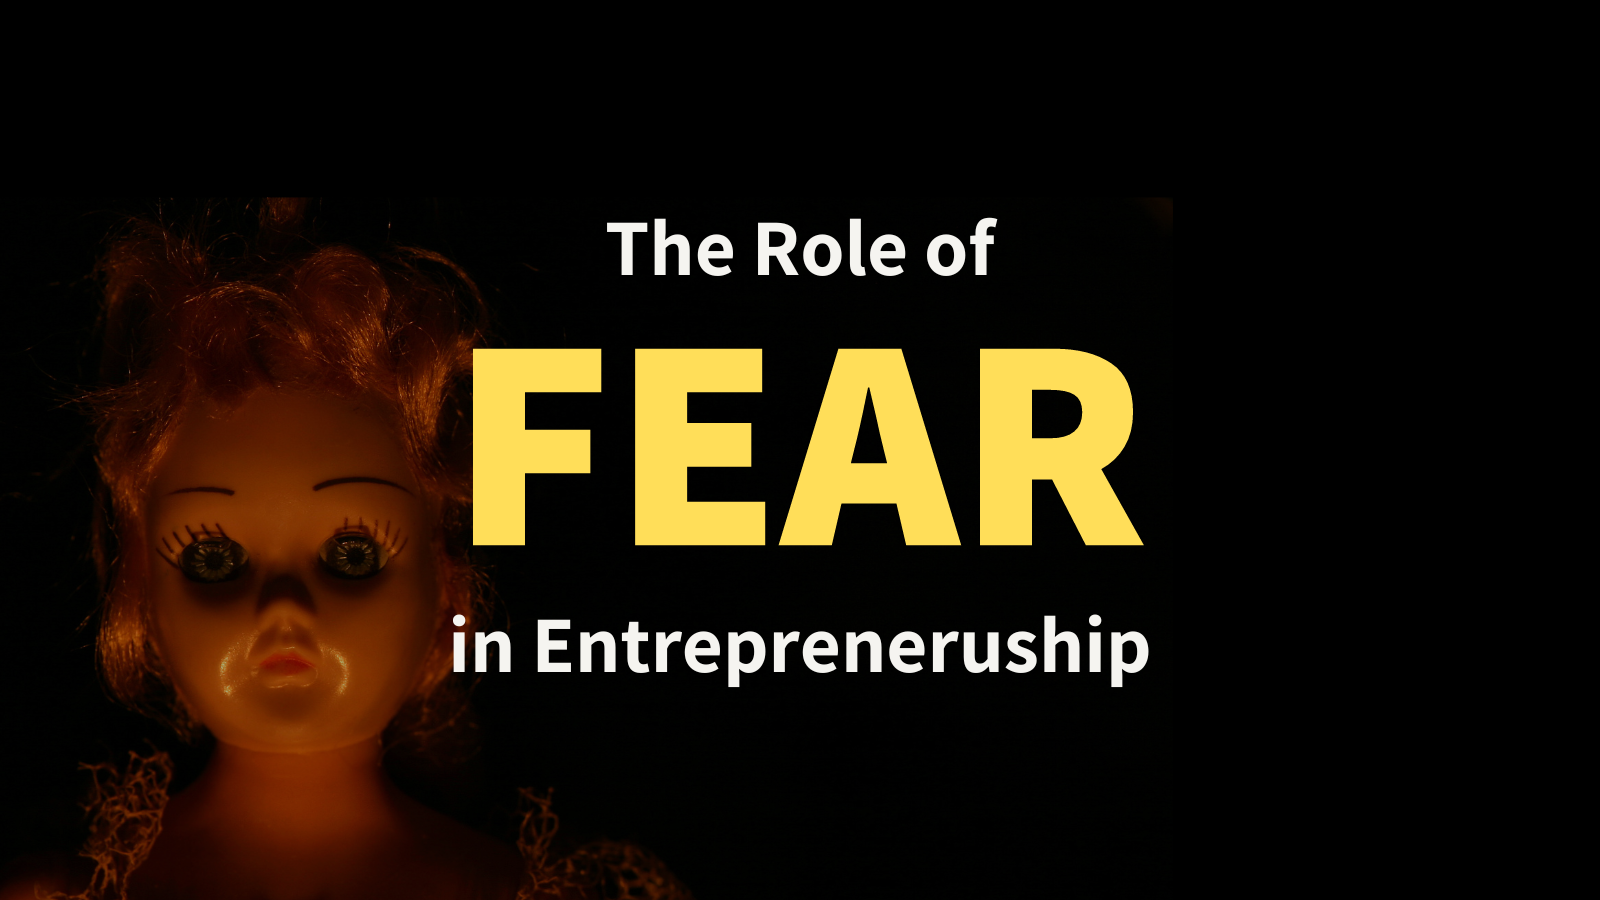 The Role of Fear in Entrepreneurship